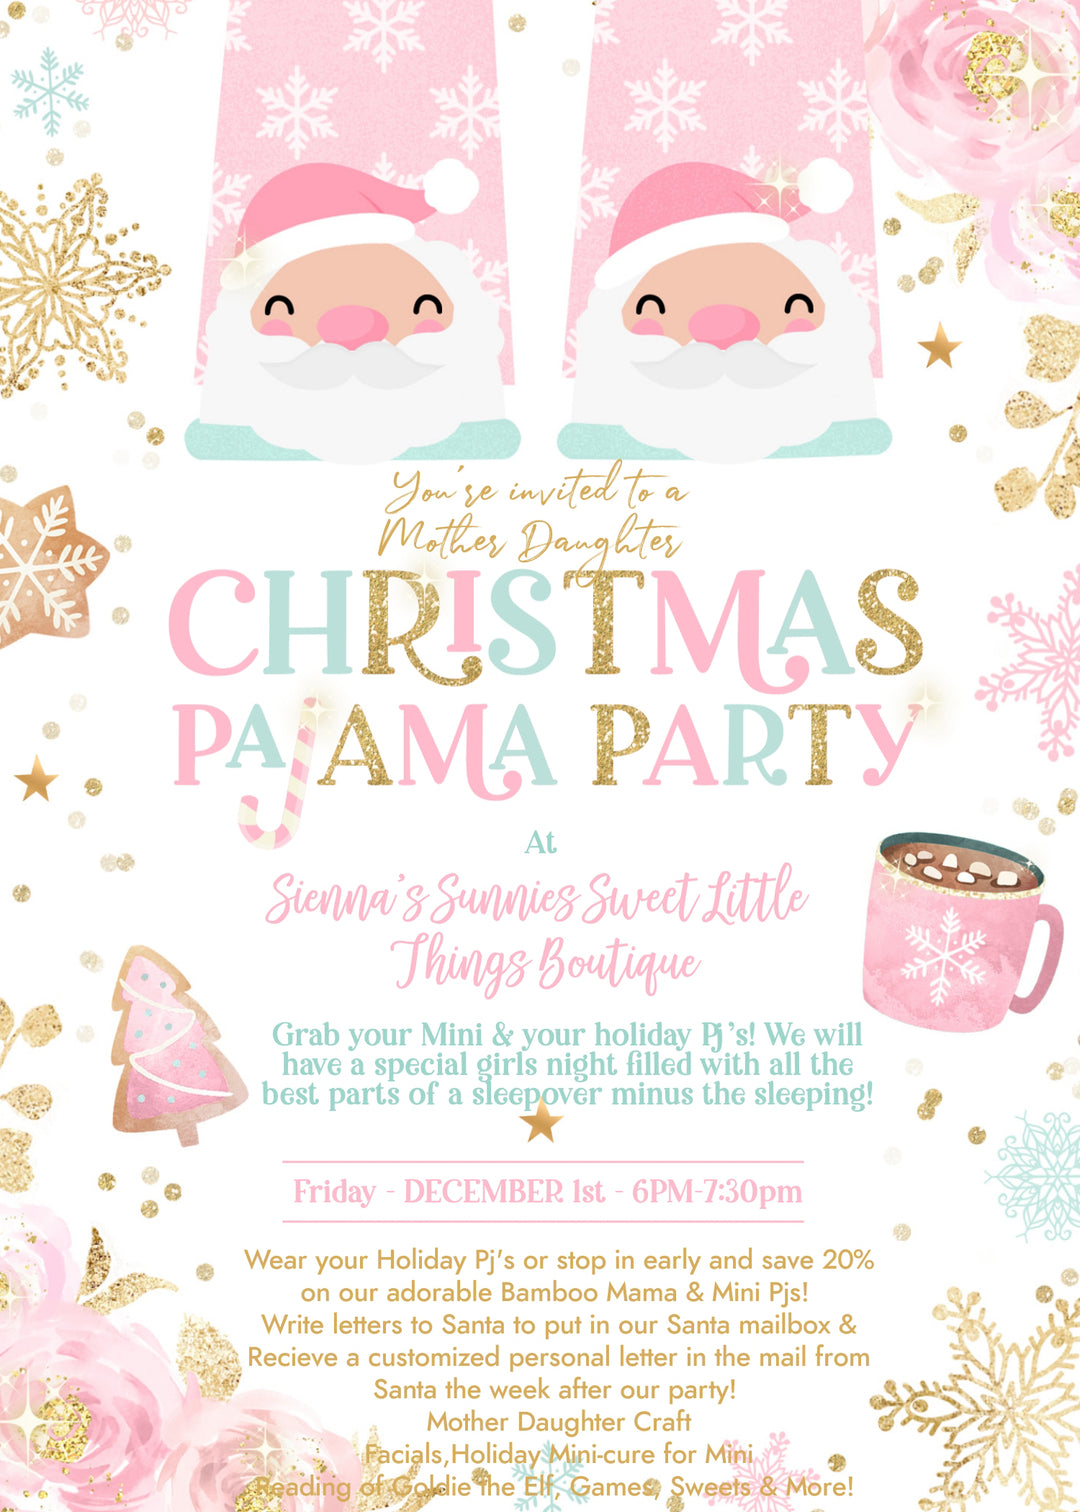 Snow White's Mother Daughter Holiday PJ Party!